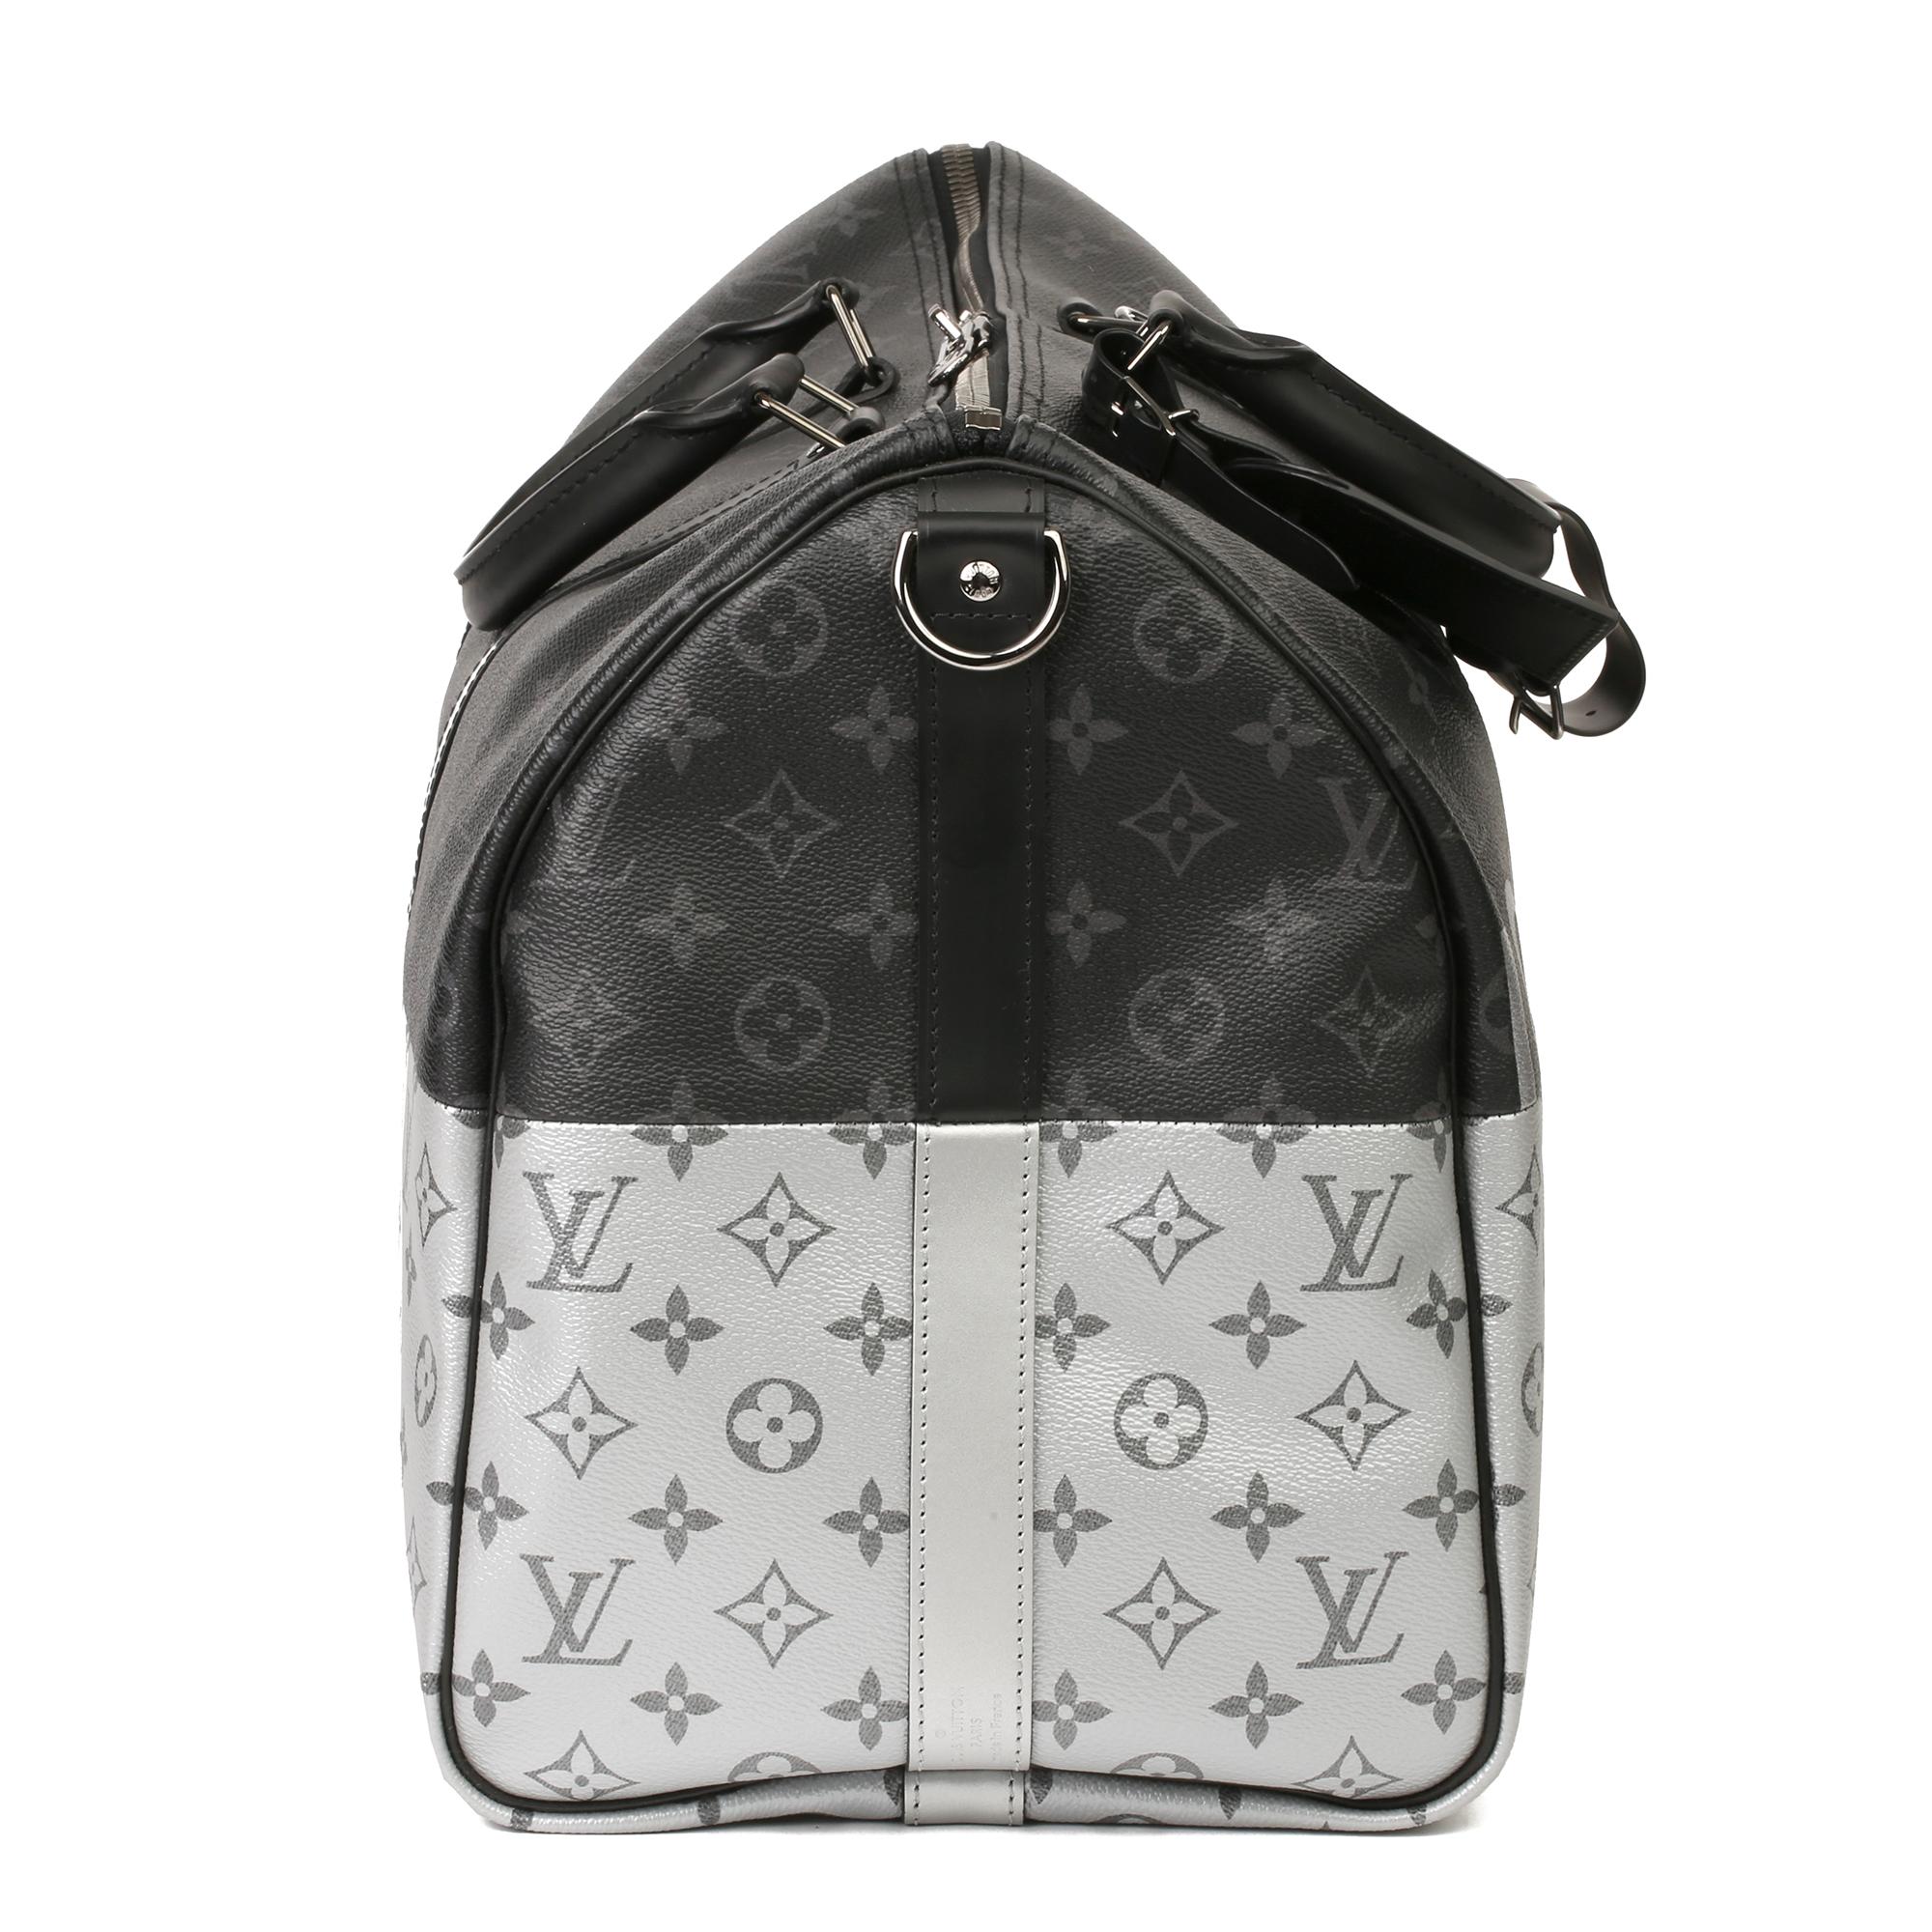 LOUIS VUITTON
Black & Silver Monogram Eclipse Coated Canvas & Black Calfskin Leather Split Keepall 50 Bandoulière

Xupes Reference: HB3858
Serial Number: DR1108
Age (Circa): 2018
Accompanied By: Louis Vuitton Dust Bag, Box, Padlock, Keys, Luggage